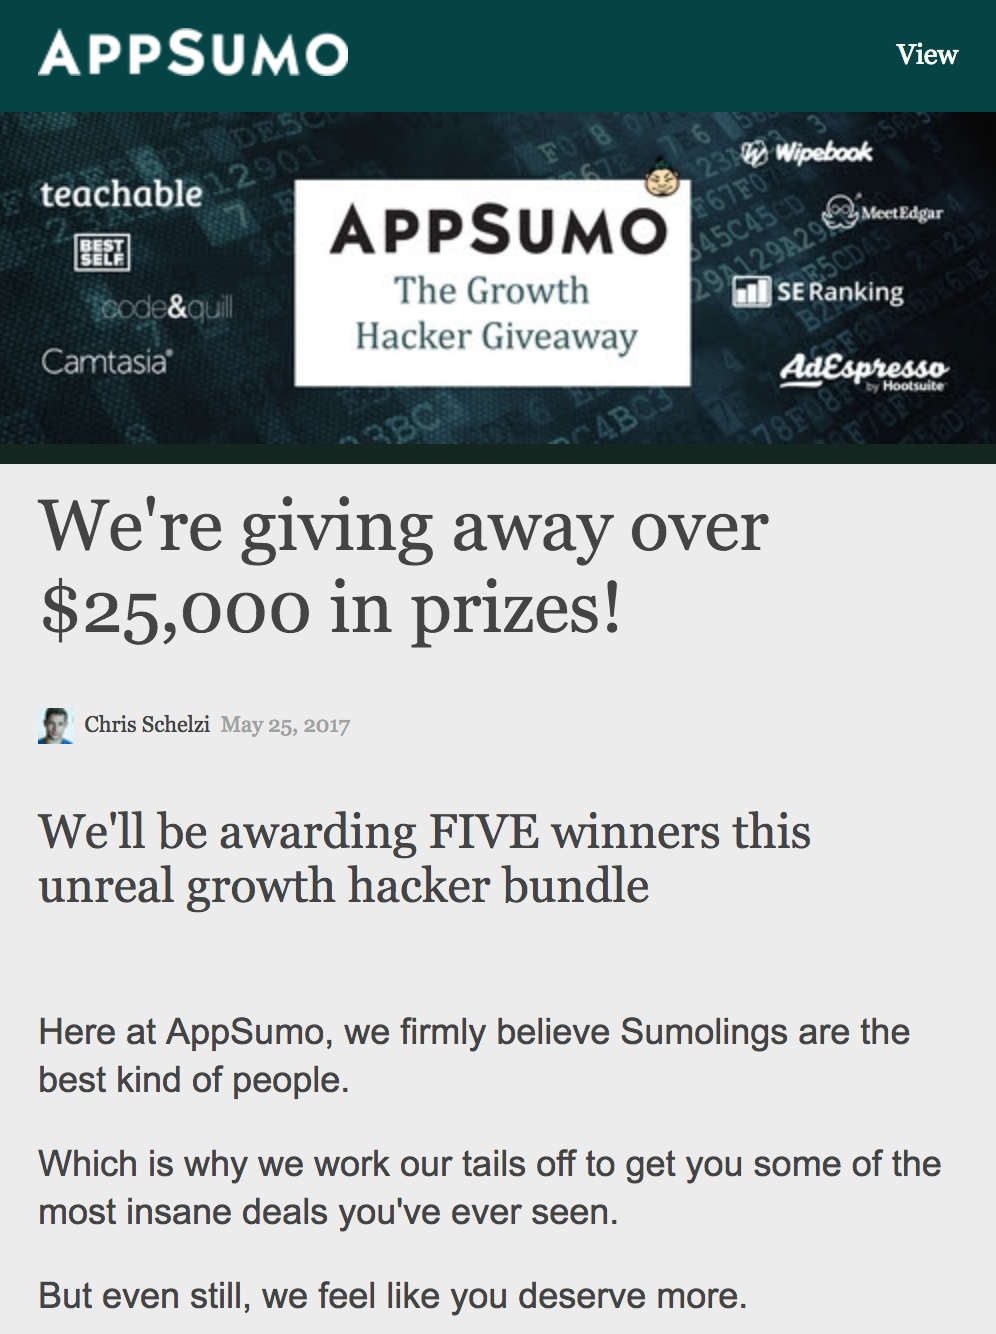 Screenshot showing copy for an appsumo giveaway